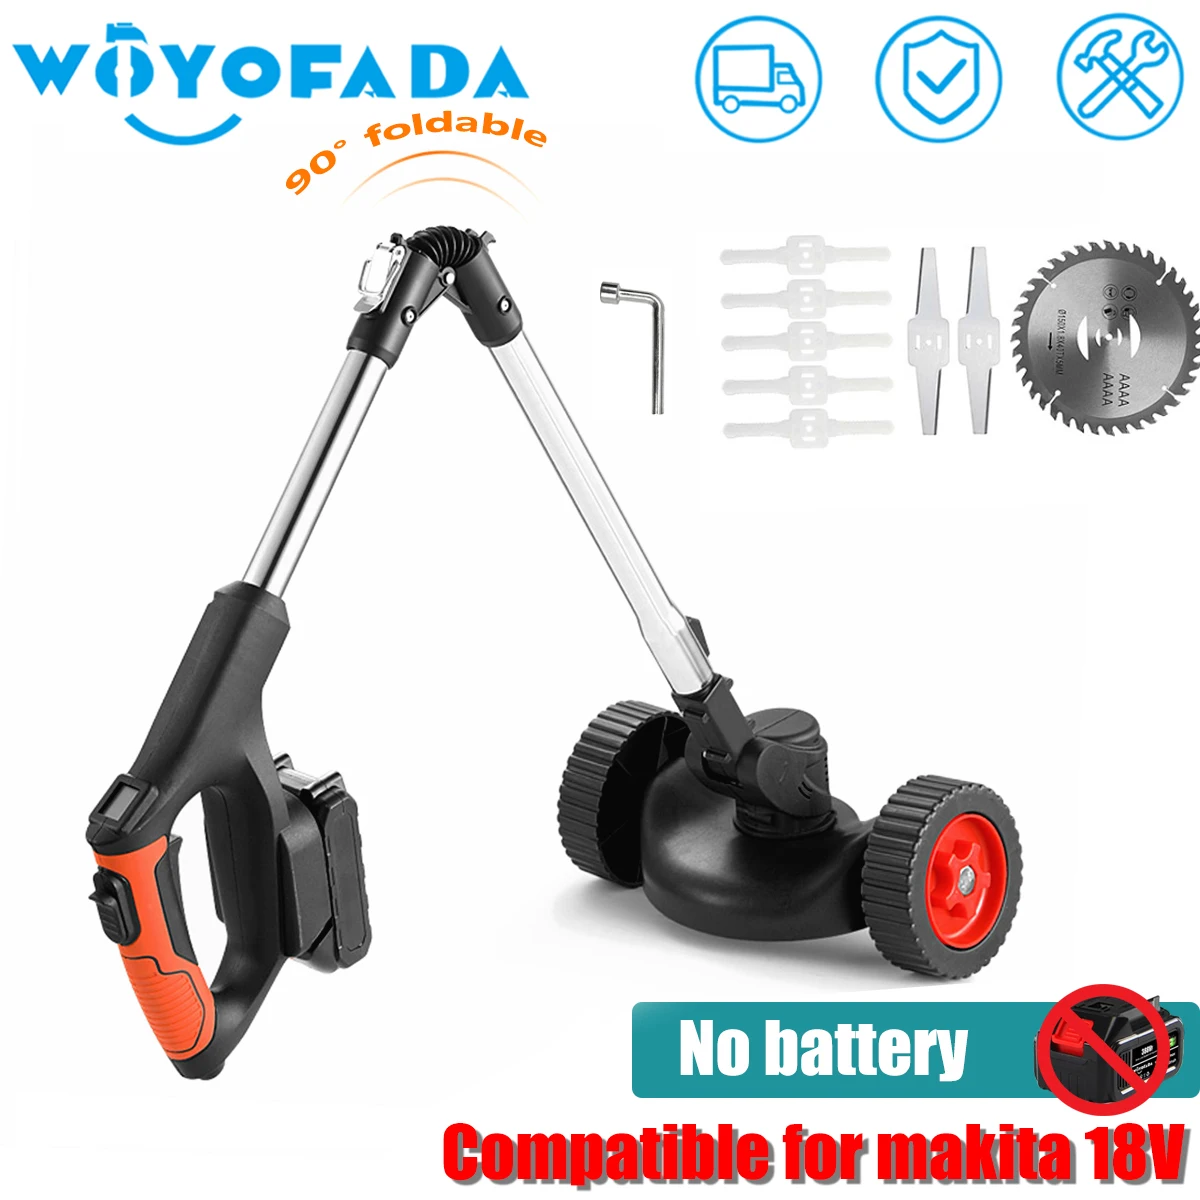 Adjustable Length Telescopic Cordless Lawn Mower Foldable Handheld Electric Grass Trimmer Pruning Garden Tools For Makita 18V